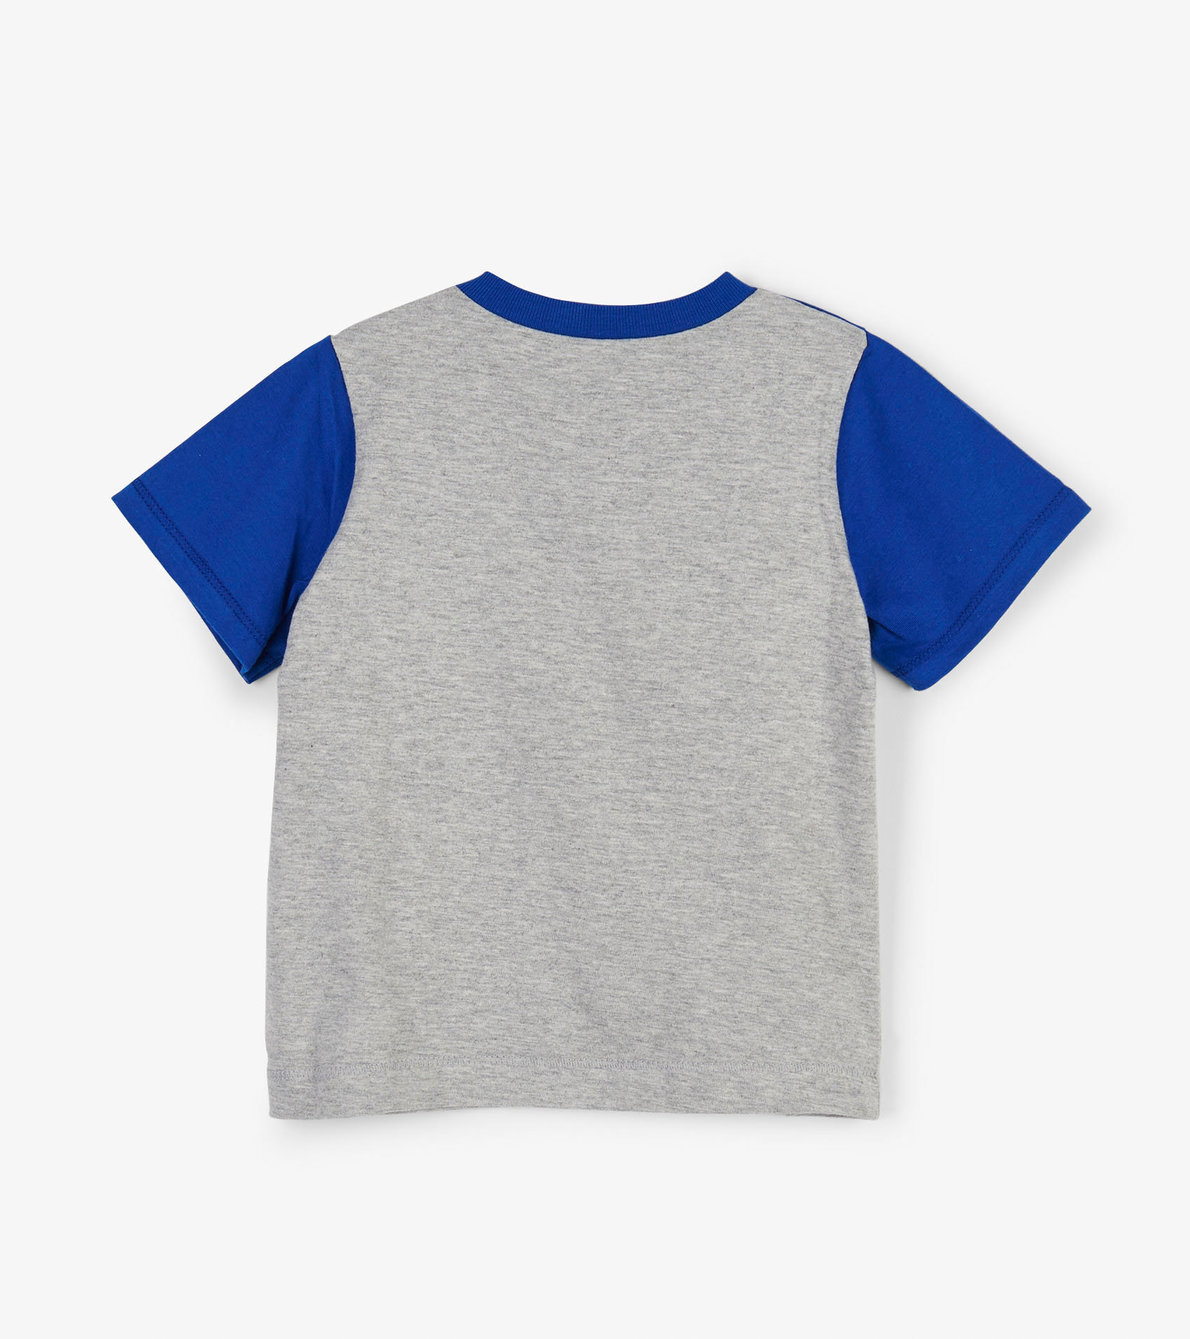 View larger image of Colour Block Bear Baby Tee